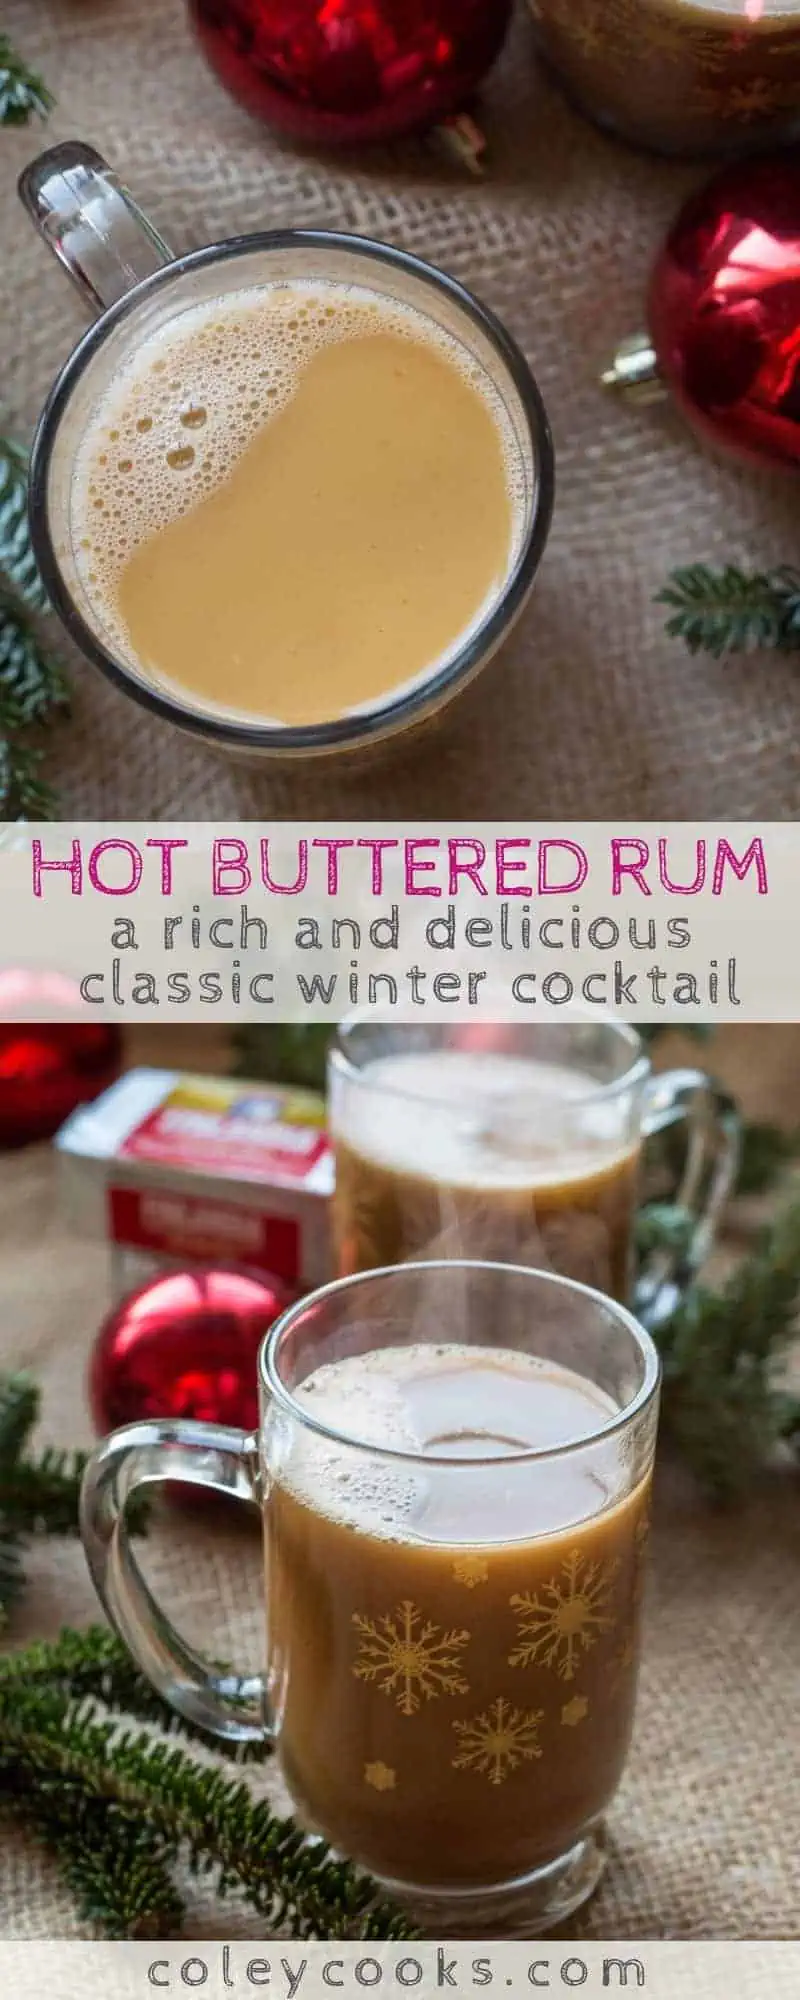 HOT BUTTERED RUM | This rich and delicious classic winter cocktail is perfect for the holidays! Warm, sweet and totally decadent! #easy #christmas #recipe #cocktail #rum #hot #drink | ColeyCooks.com